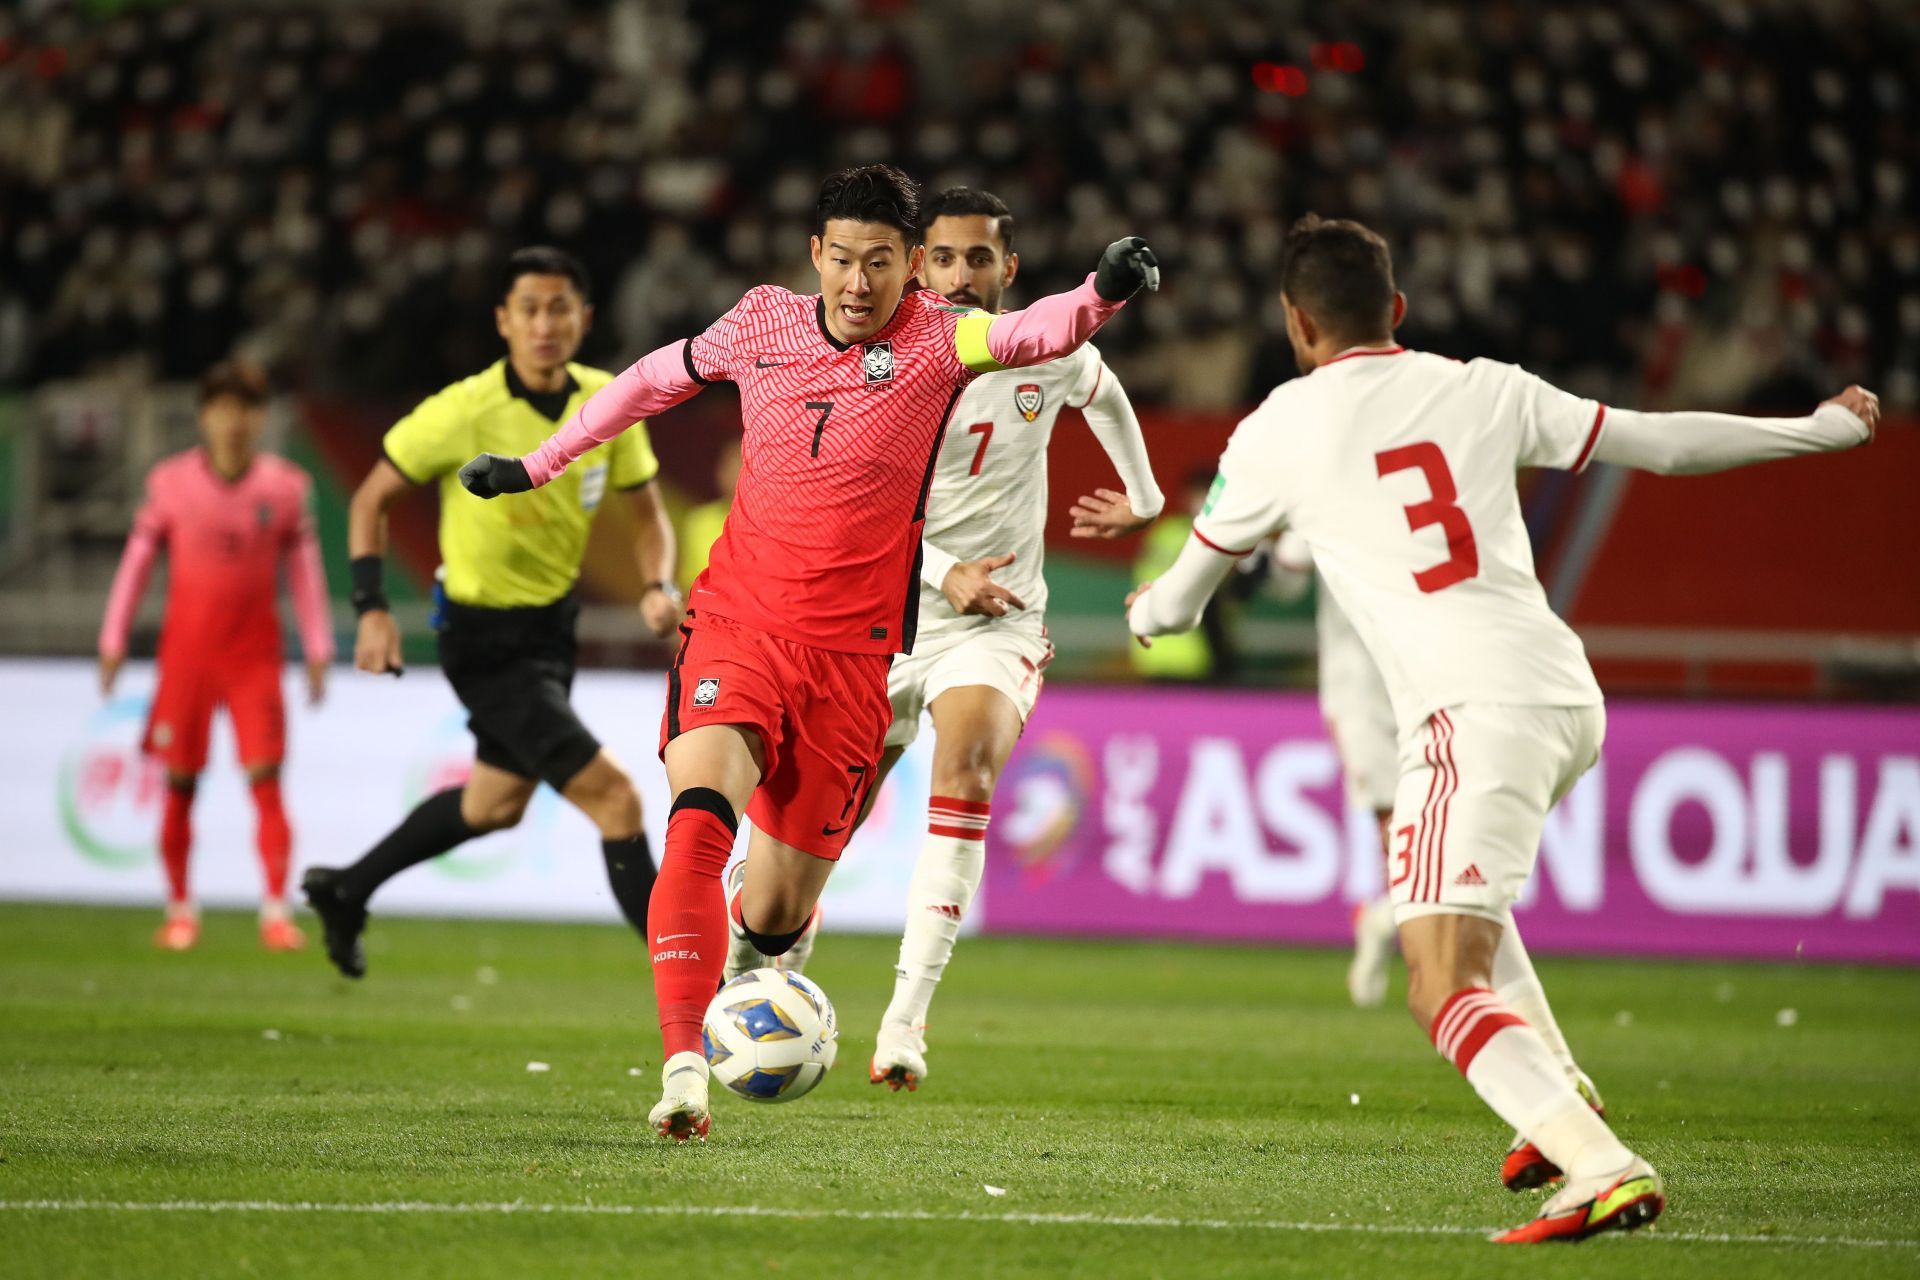 UAE and South Korea square off in the final game of the qualification campaign on Tuesday